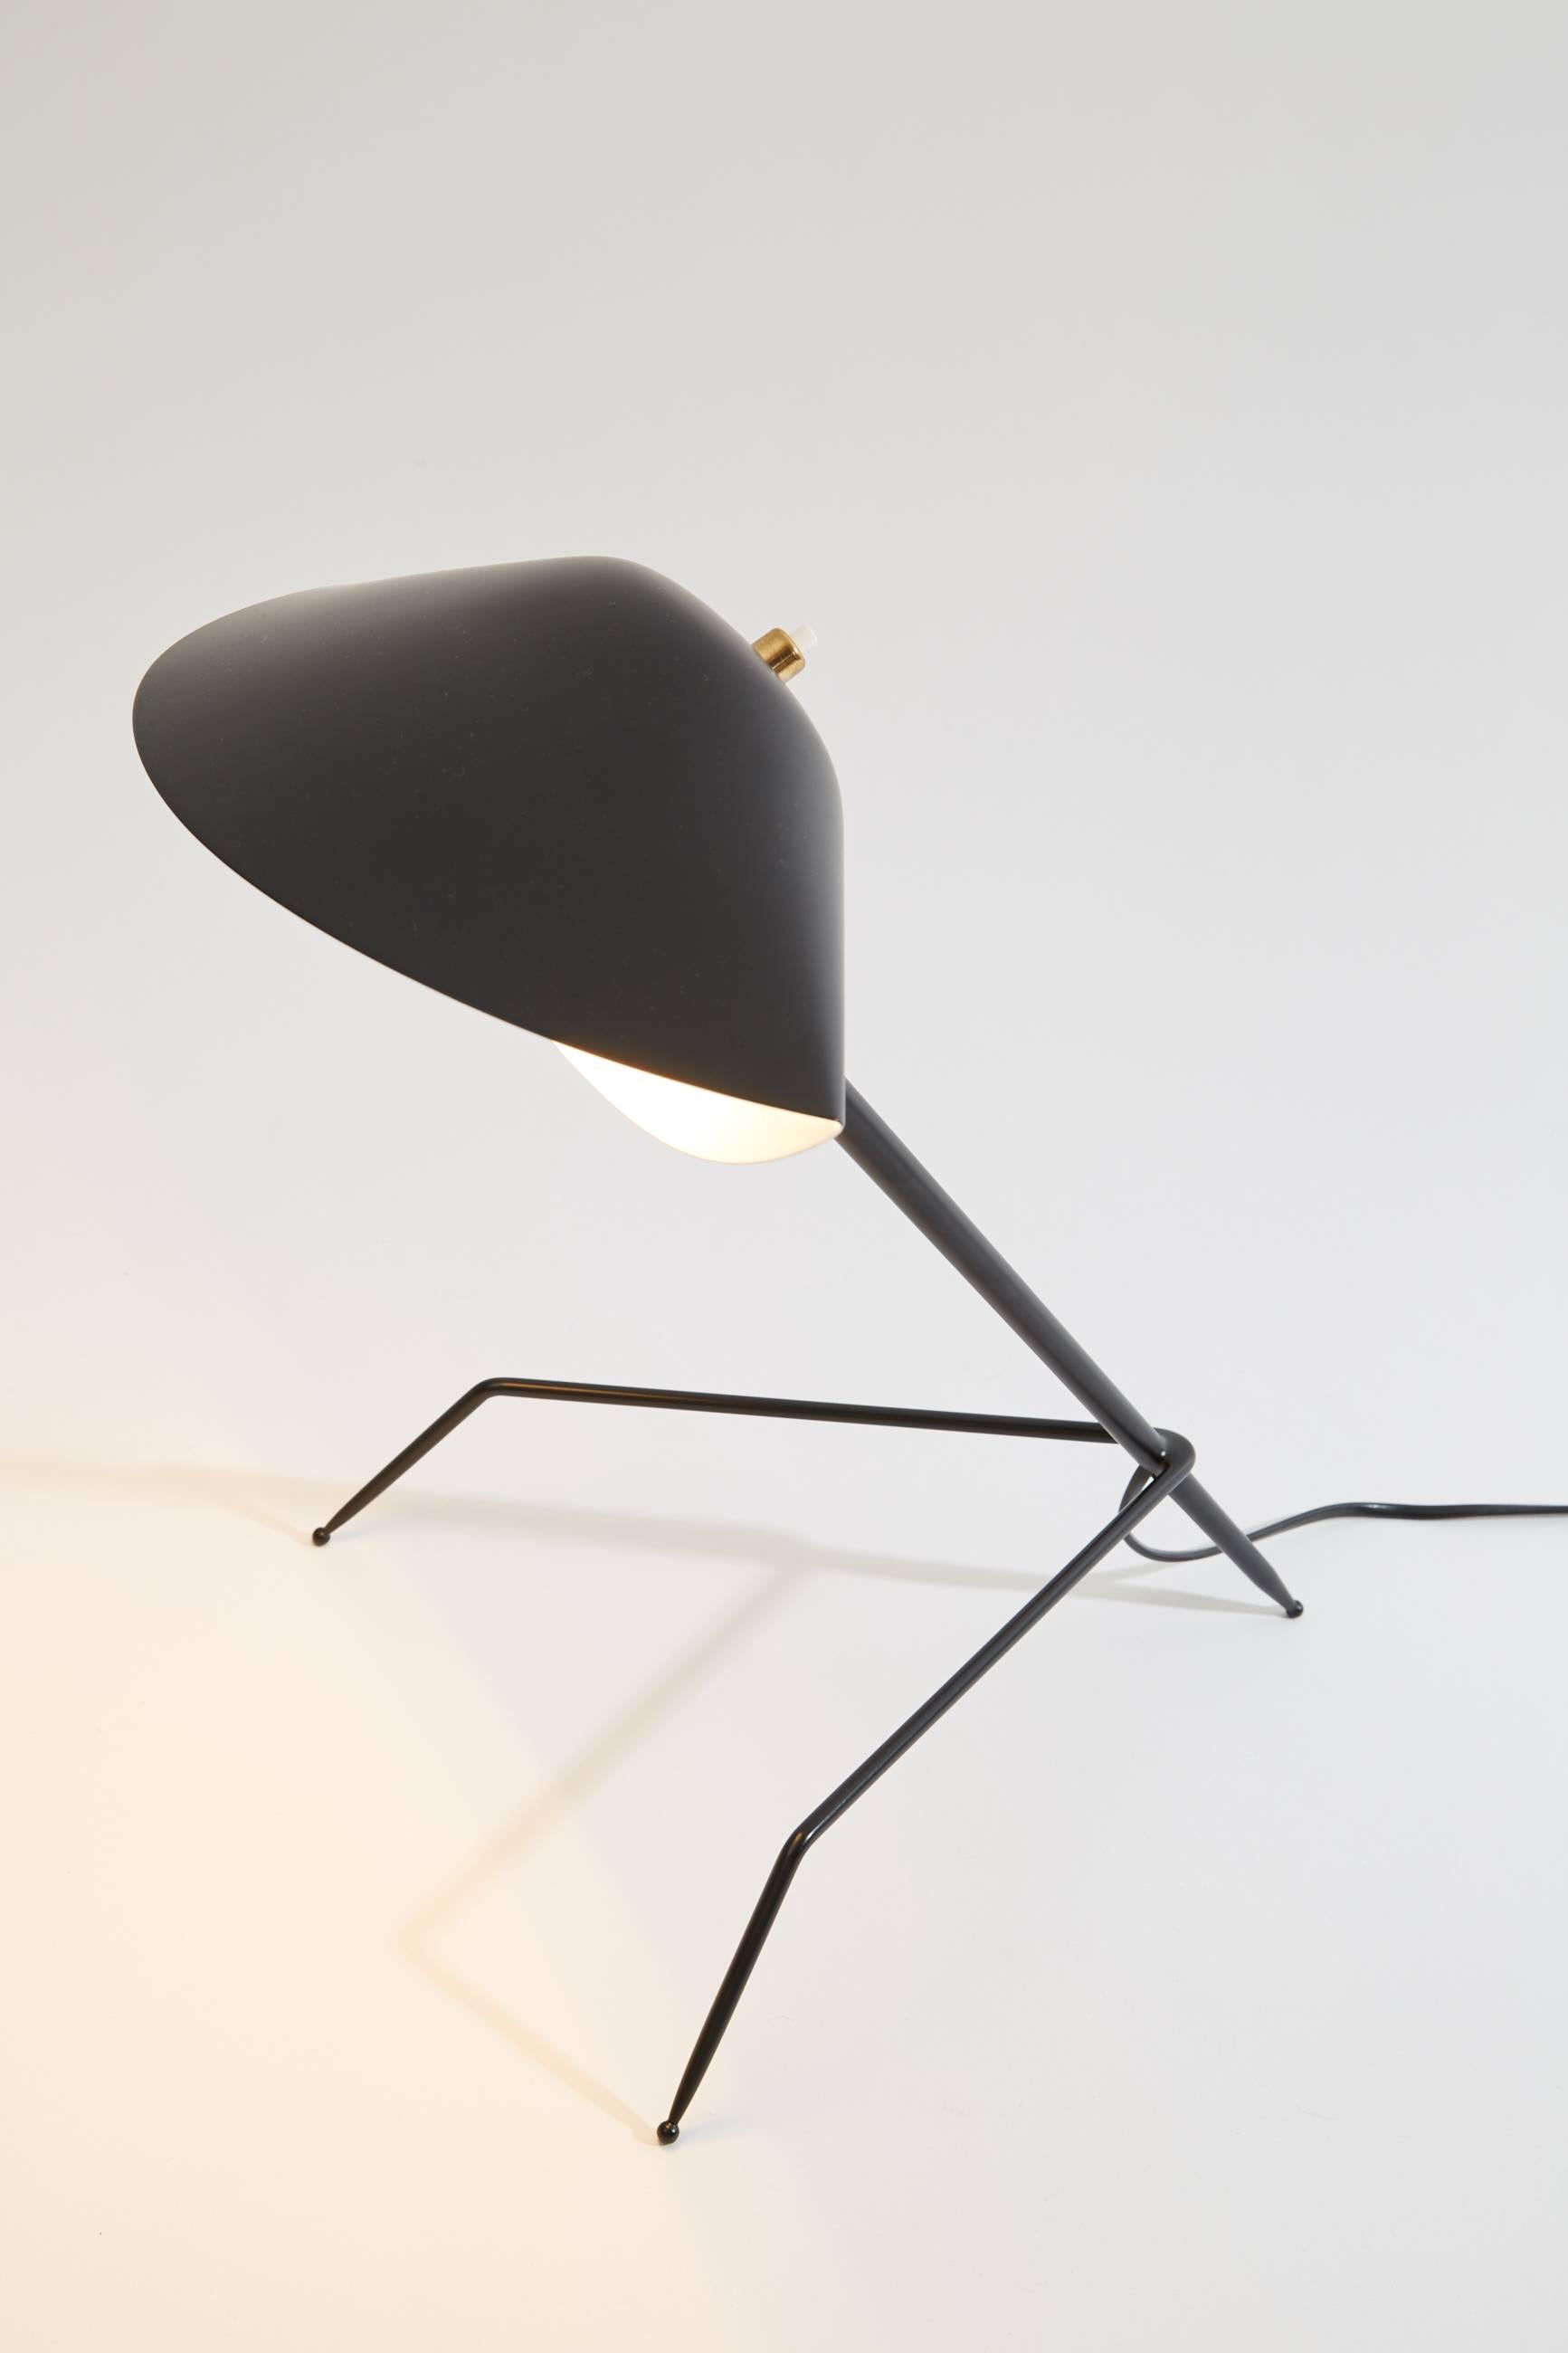 Desk lamp tripod designed by Serge Mouille in 1954.

Measurements : 26 x 29,5 x h35 cm
10w x 12d x 14h inches

Given the rarity of Serge Mouille lamps, in 1999 his widow Gin decided to introduce a series of number limited editions of his creations